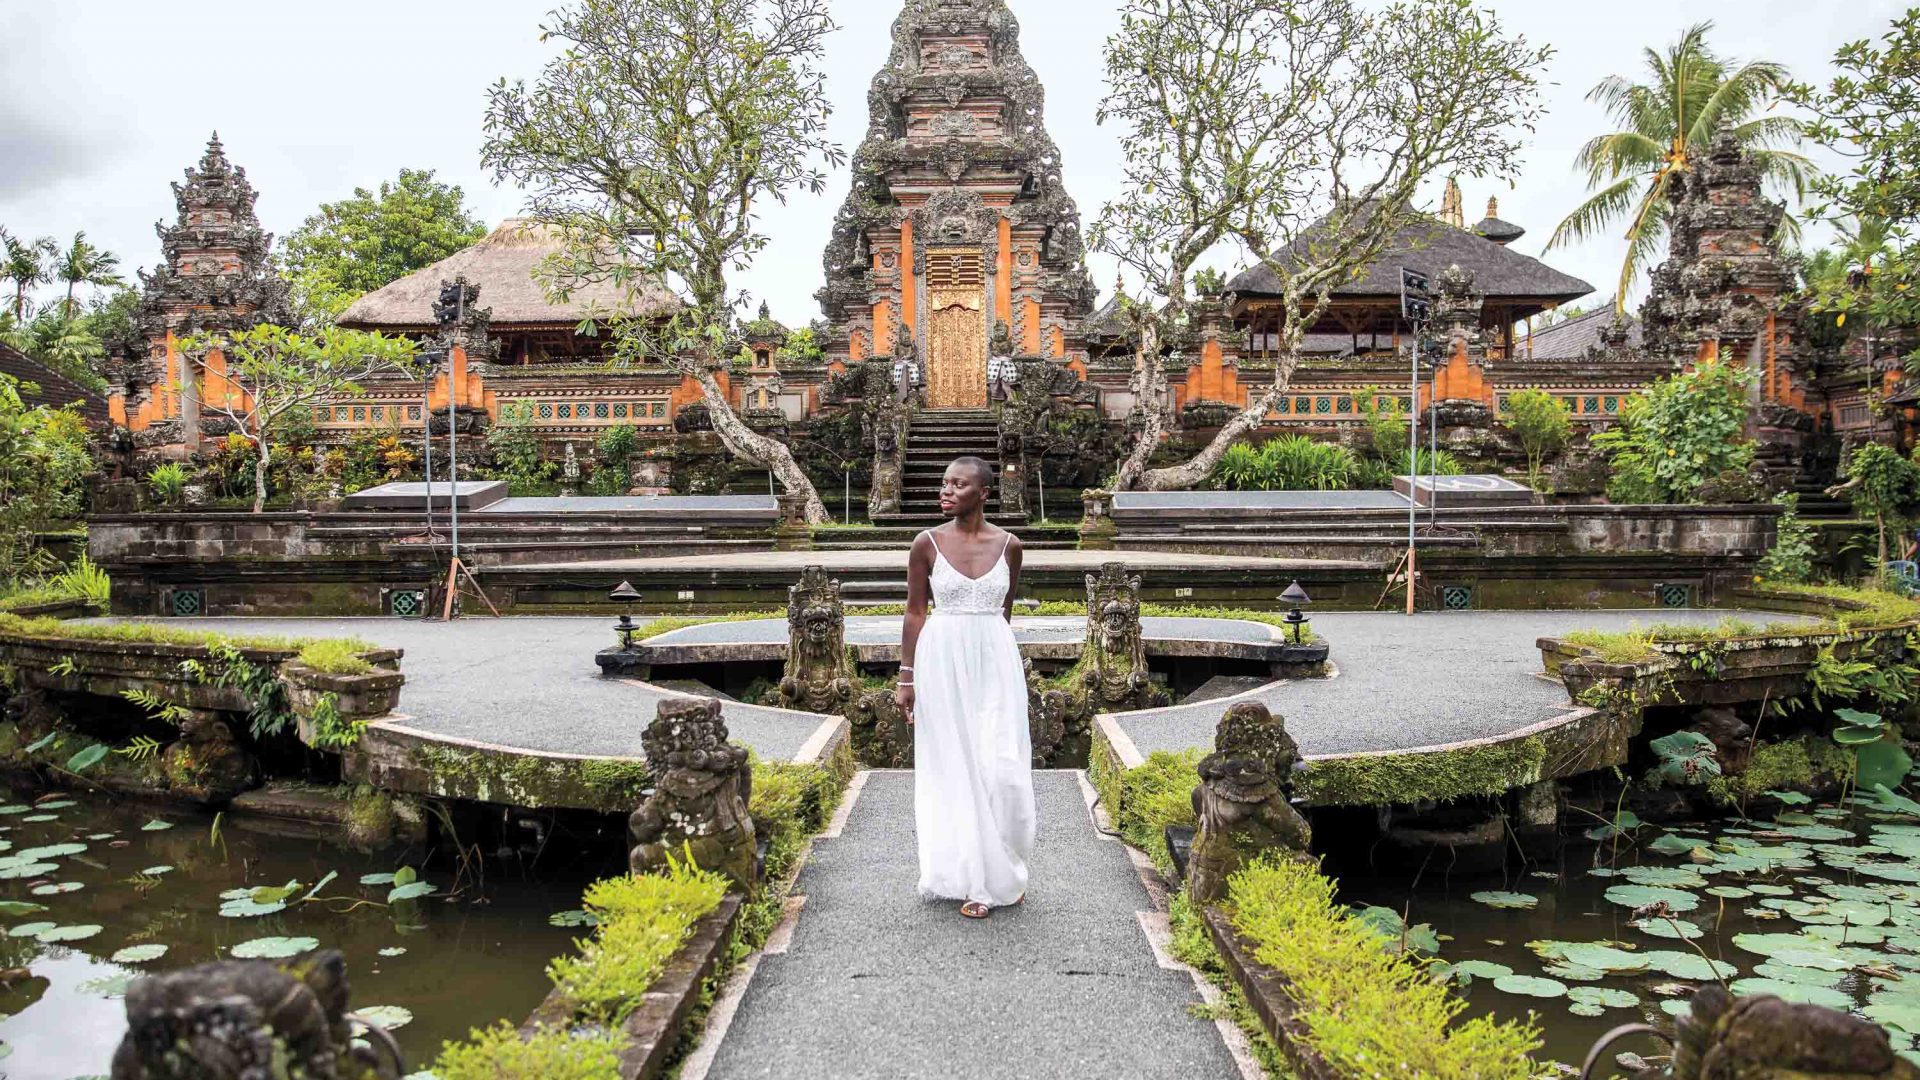 A woman, Jessica, pictured in front of a temple in Bali.